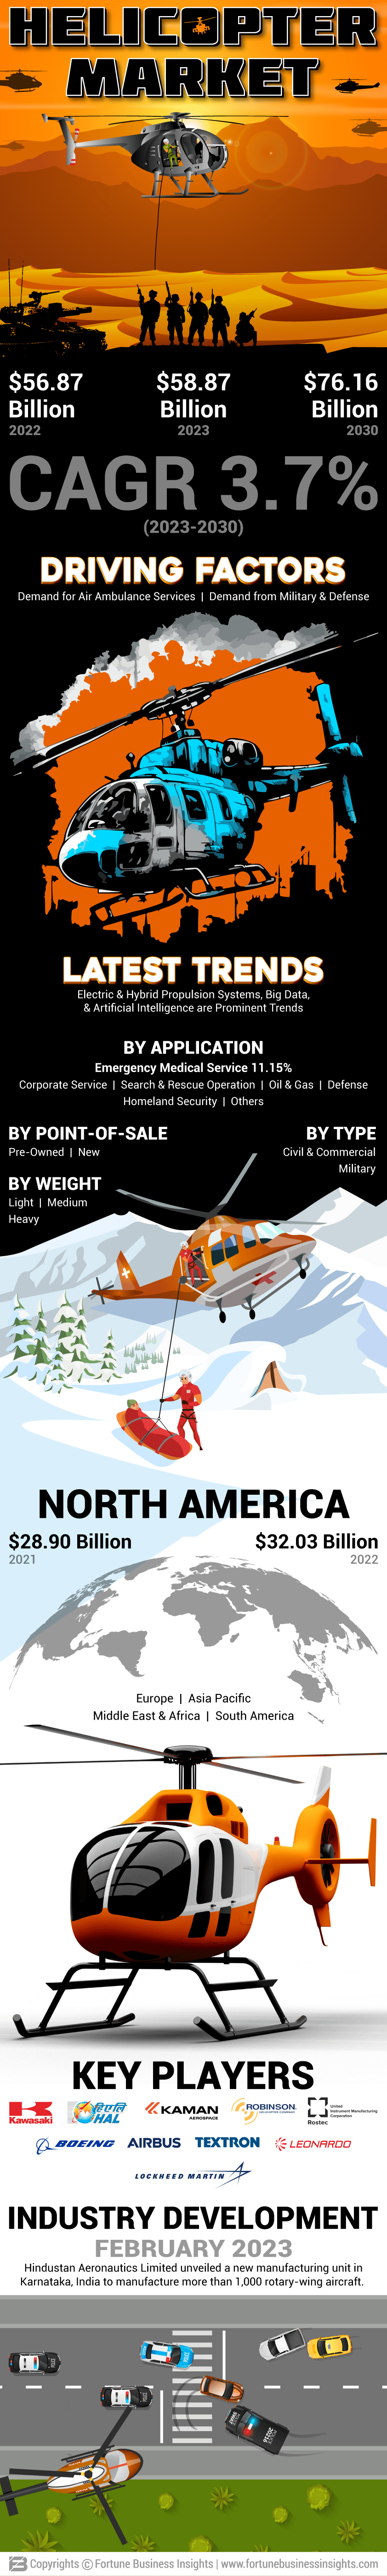 Helicopter Market